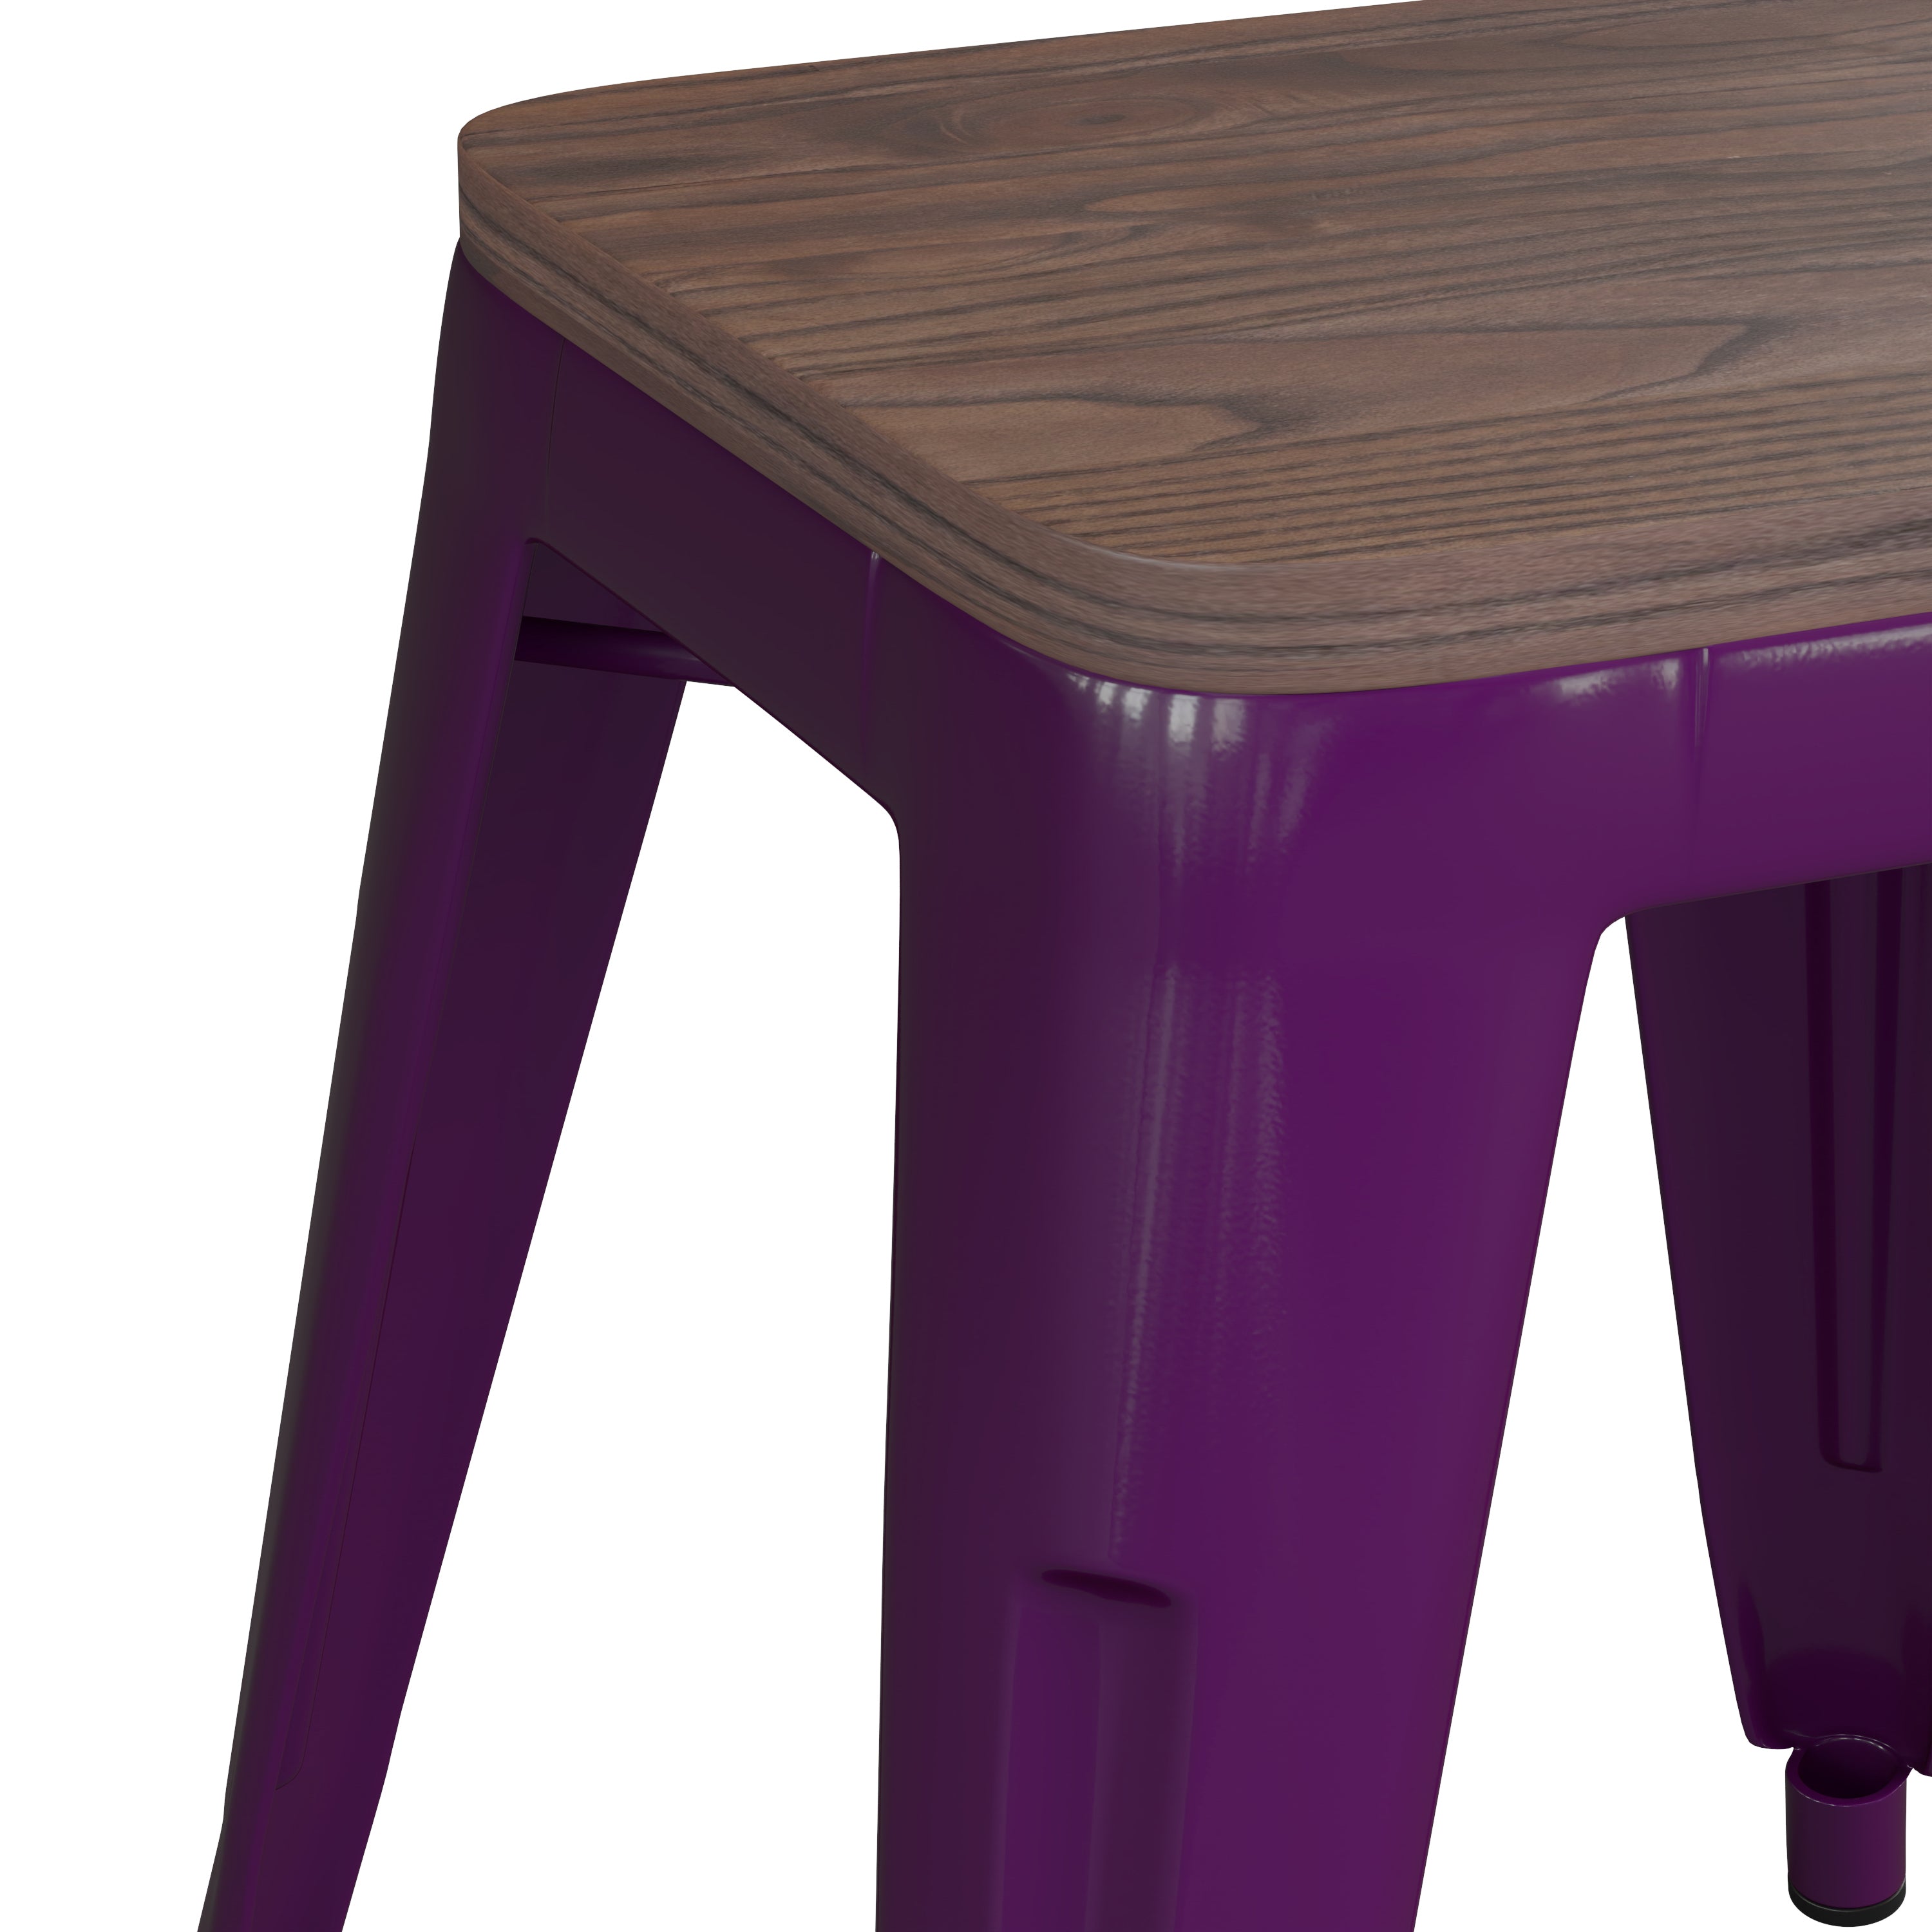 18" Backless Table Height Stool with Wooden Seat, Stackable Metal Indoor Dining Stool, Commercial Grade - Set of 4-Metal/ Colorful Restaurant Barstool-Flash Furniture-Wall2Wall Furnishings